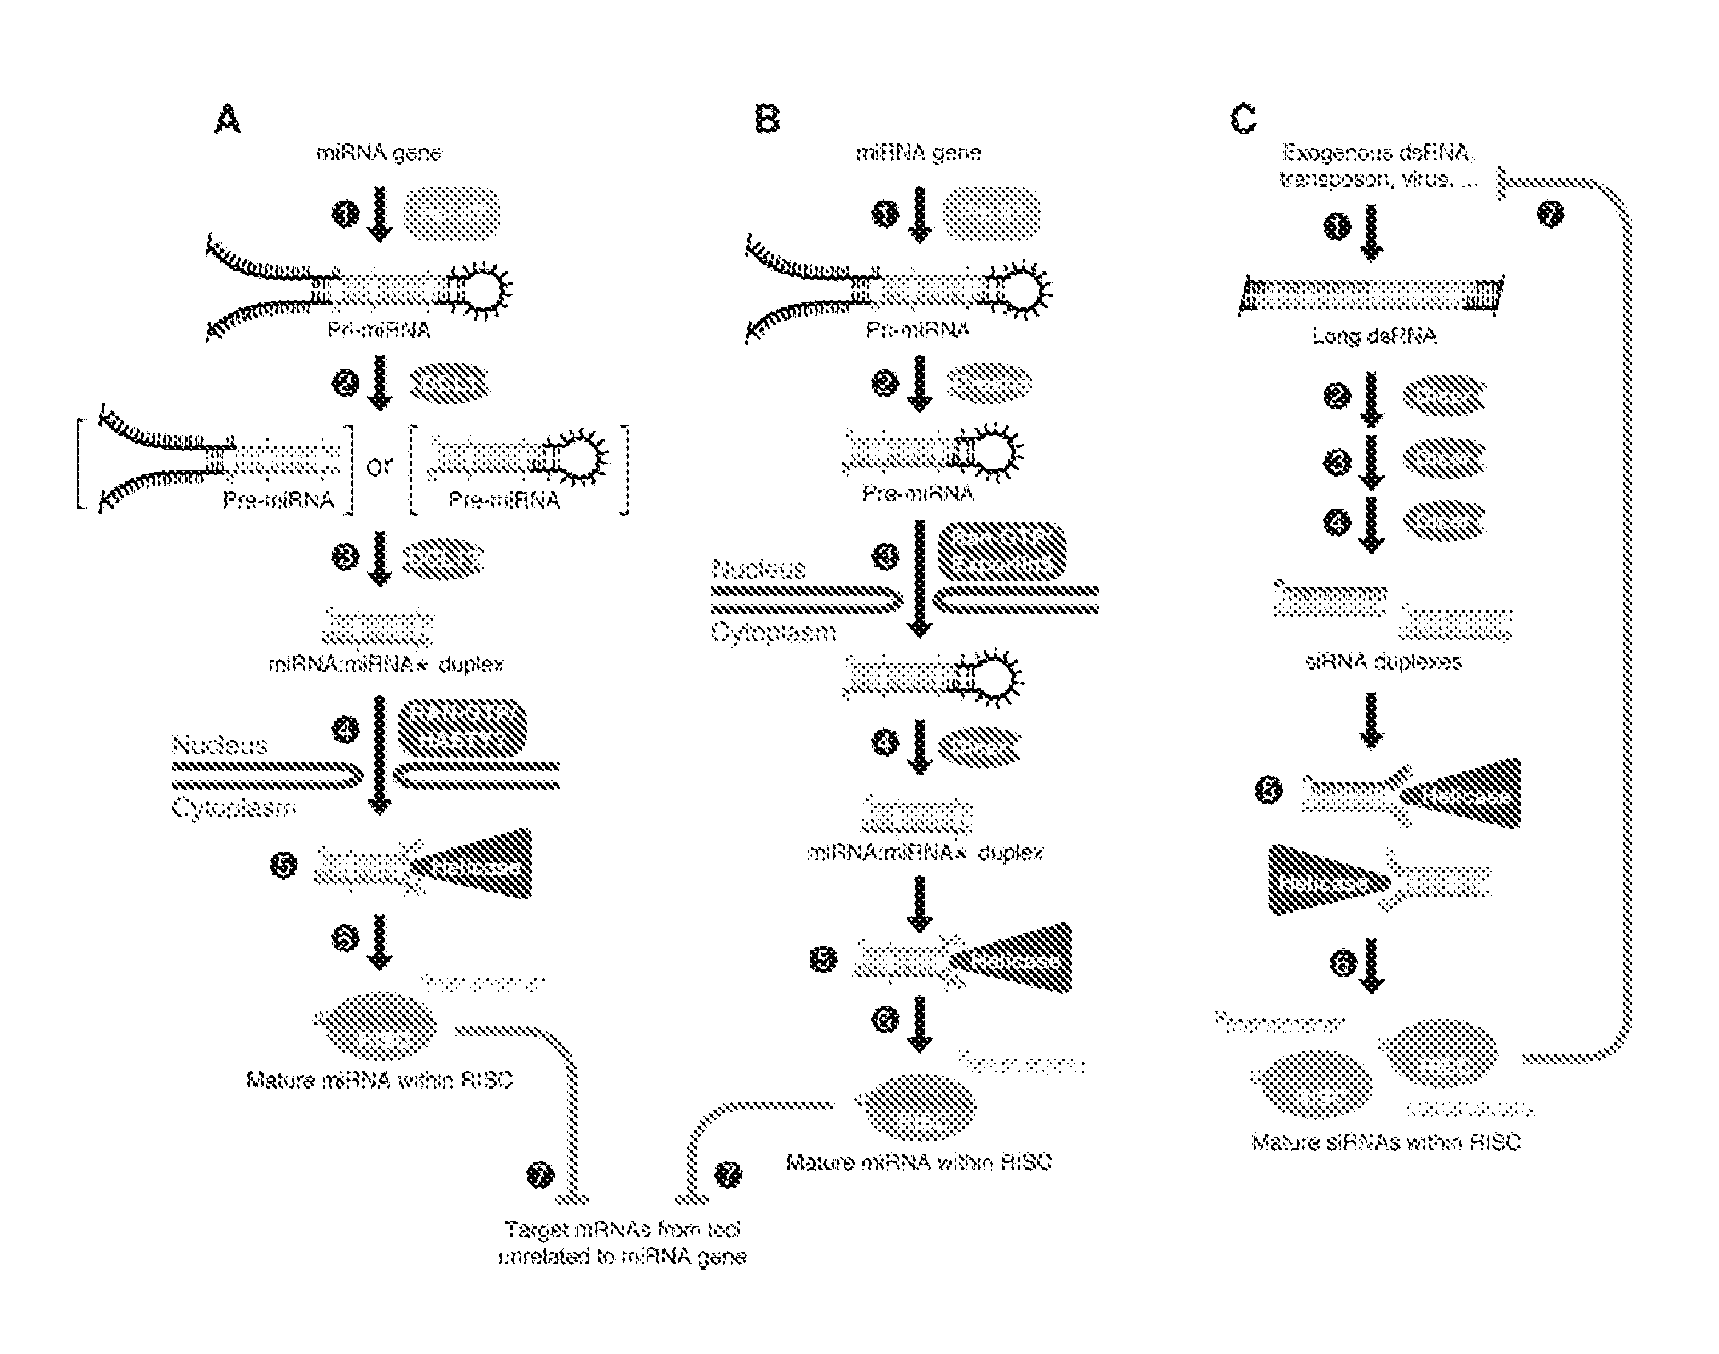 Micrornas and uses thereof